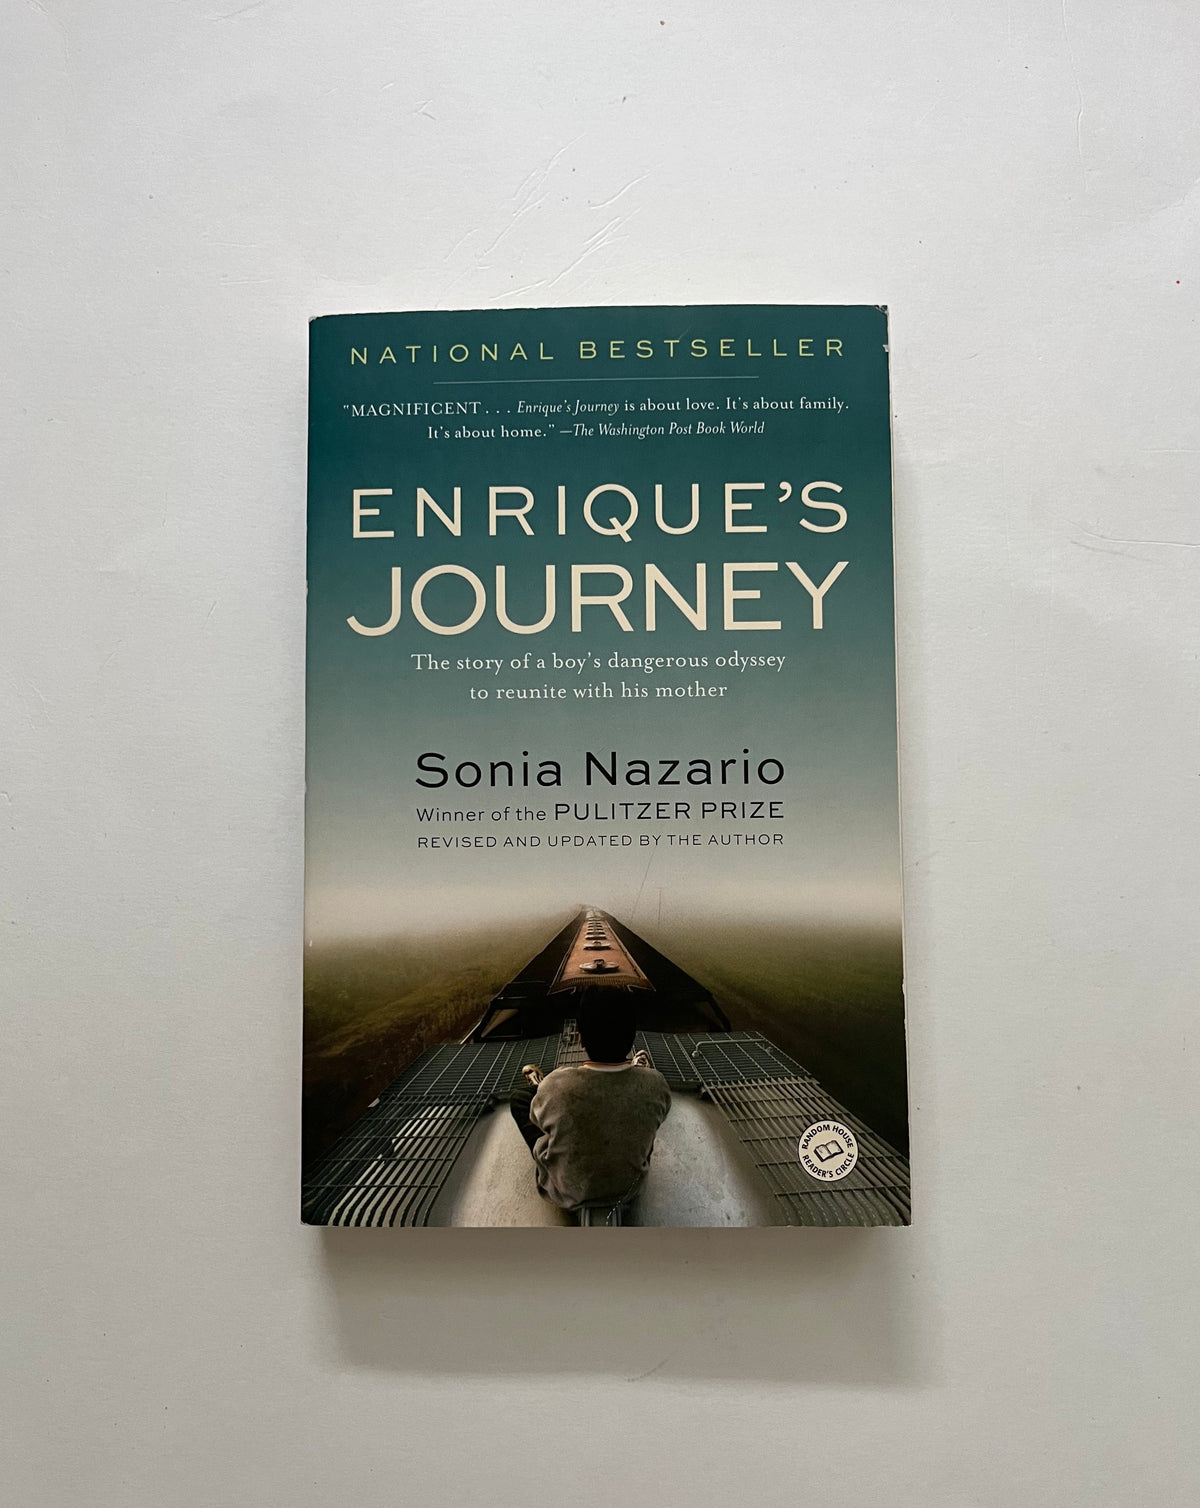 Enrique&#39;s Journey: The Story of a Boy&#39;s Dangerous Odyssey to Reunite with his Mother by Sonia Nazario